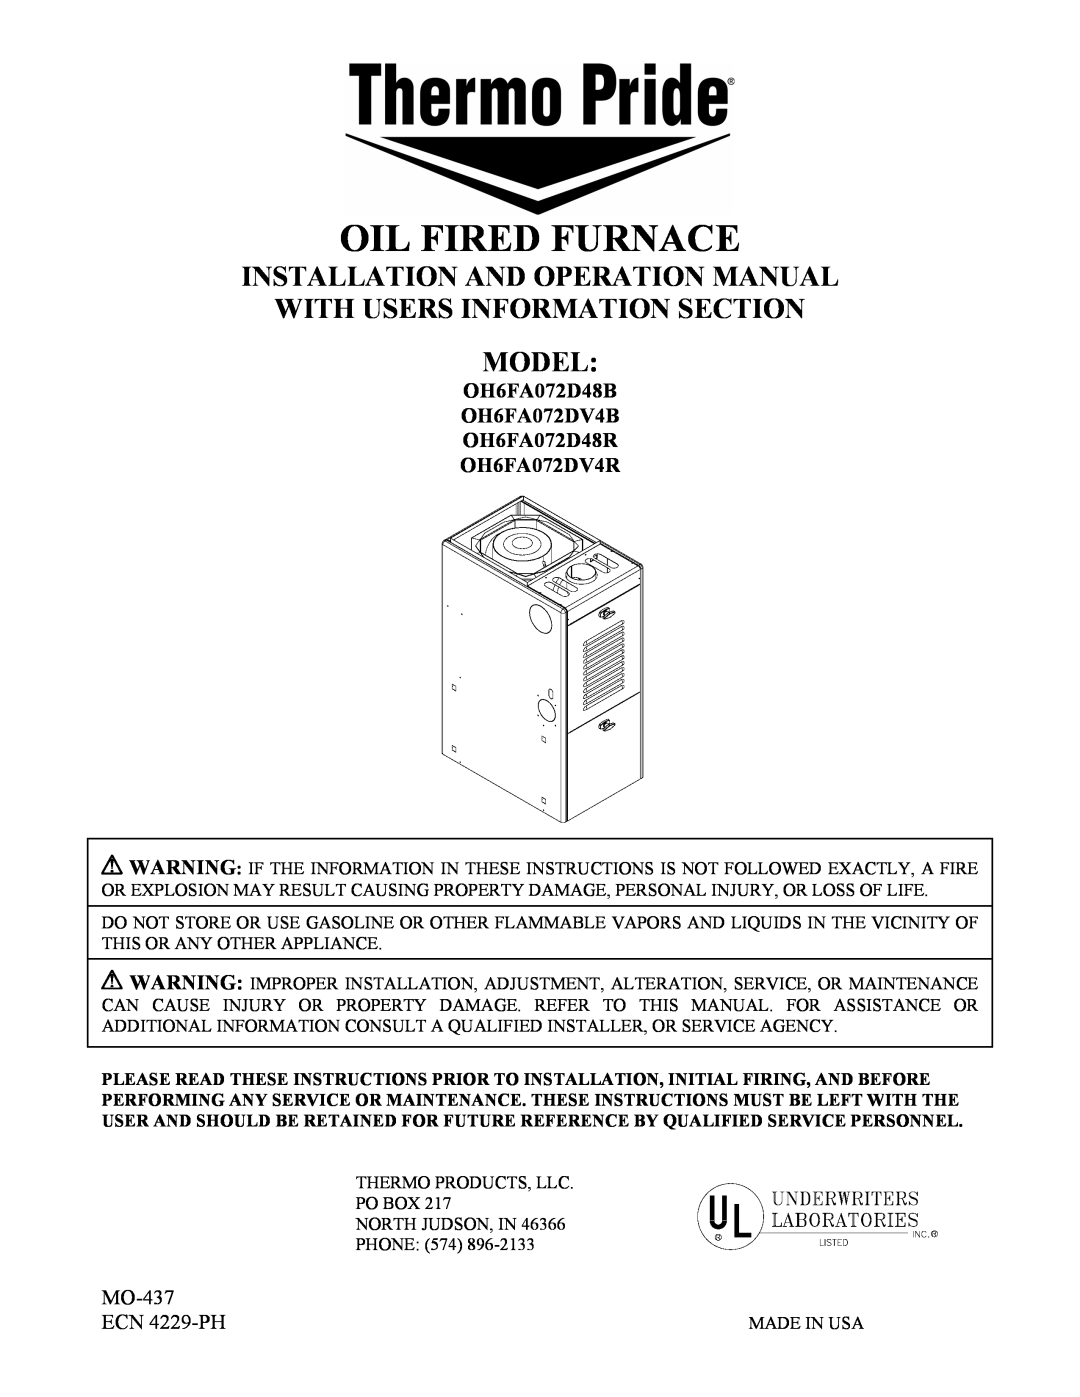 Thermo Products OH6FA072DV4R, OH6FA072D48B operation manual Oil Fired Furnace, With Users Information Section Model 